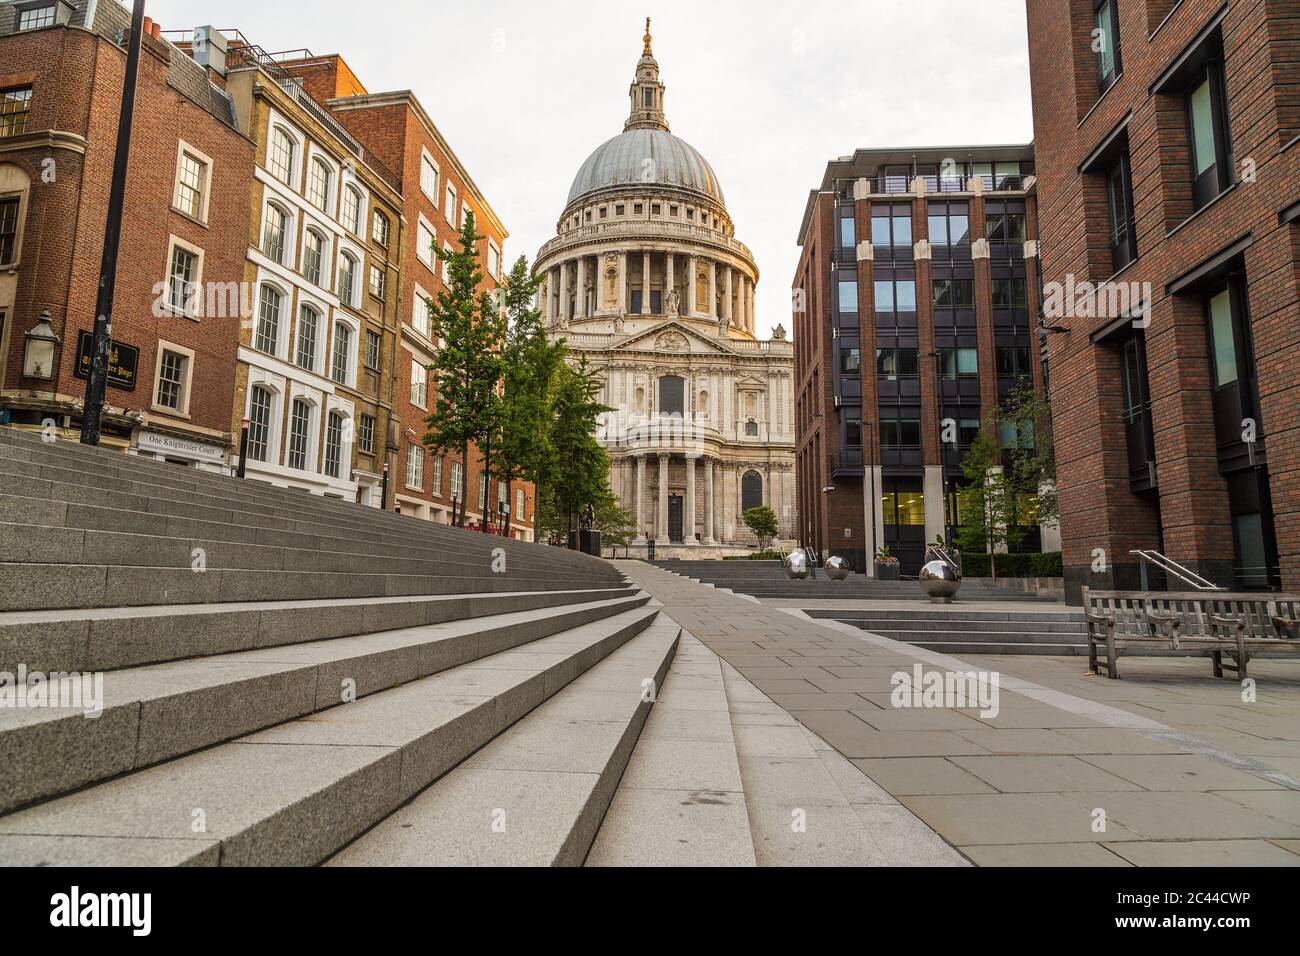 LONDON, UK - 6TH JULY 2016: A view towards St Pauls Cathedral in central London in the morning. Stock Photo